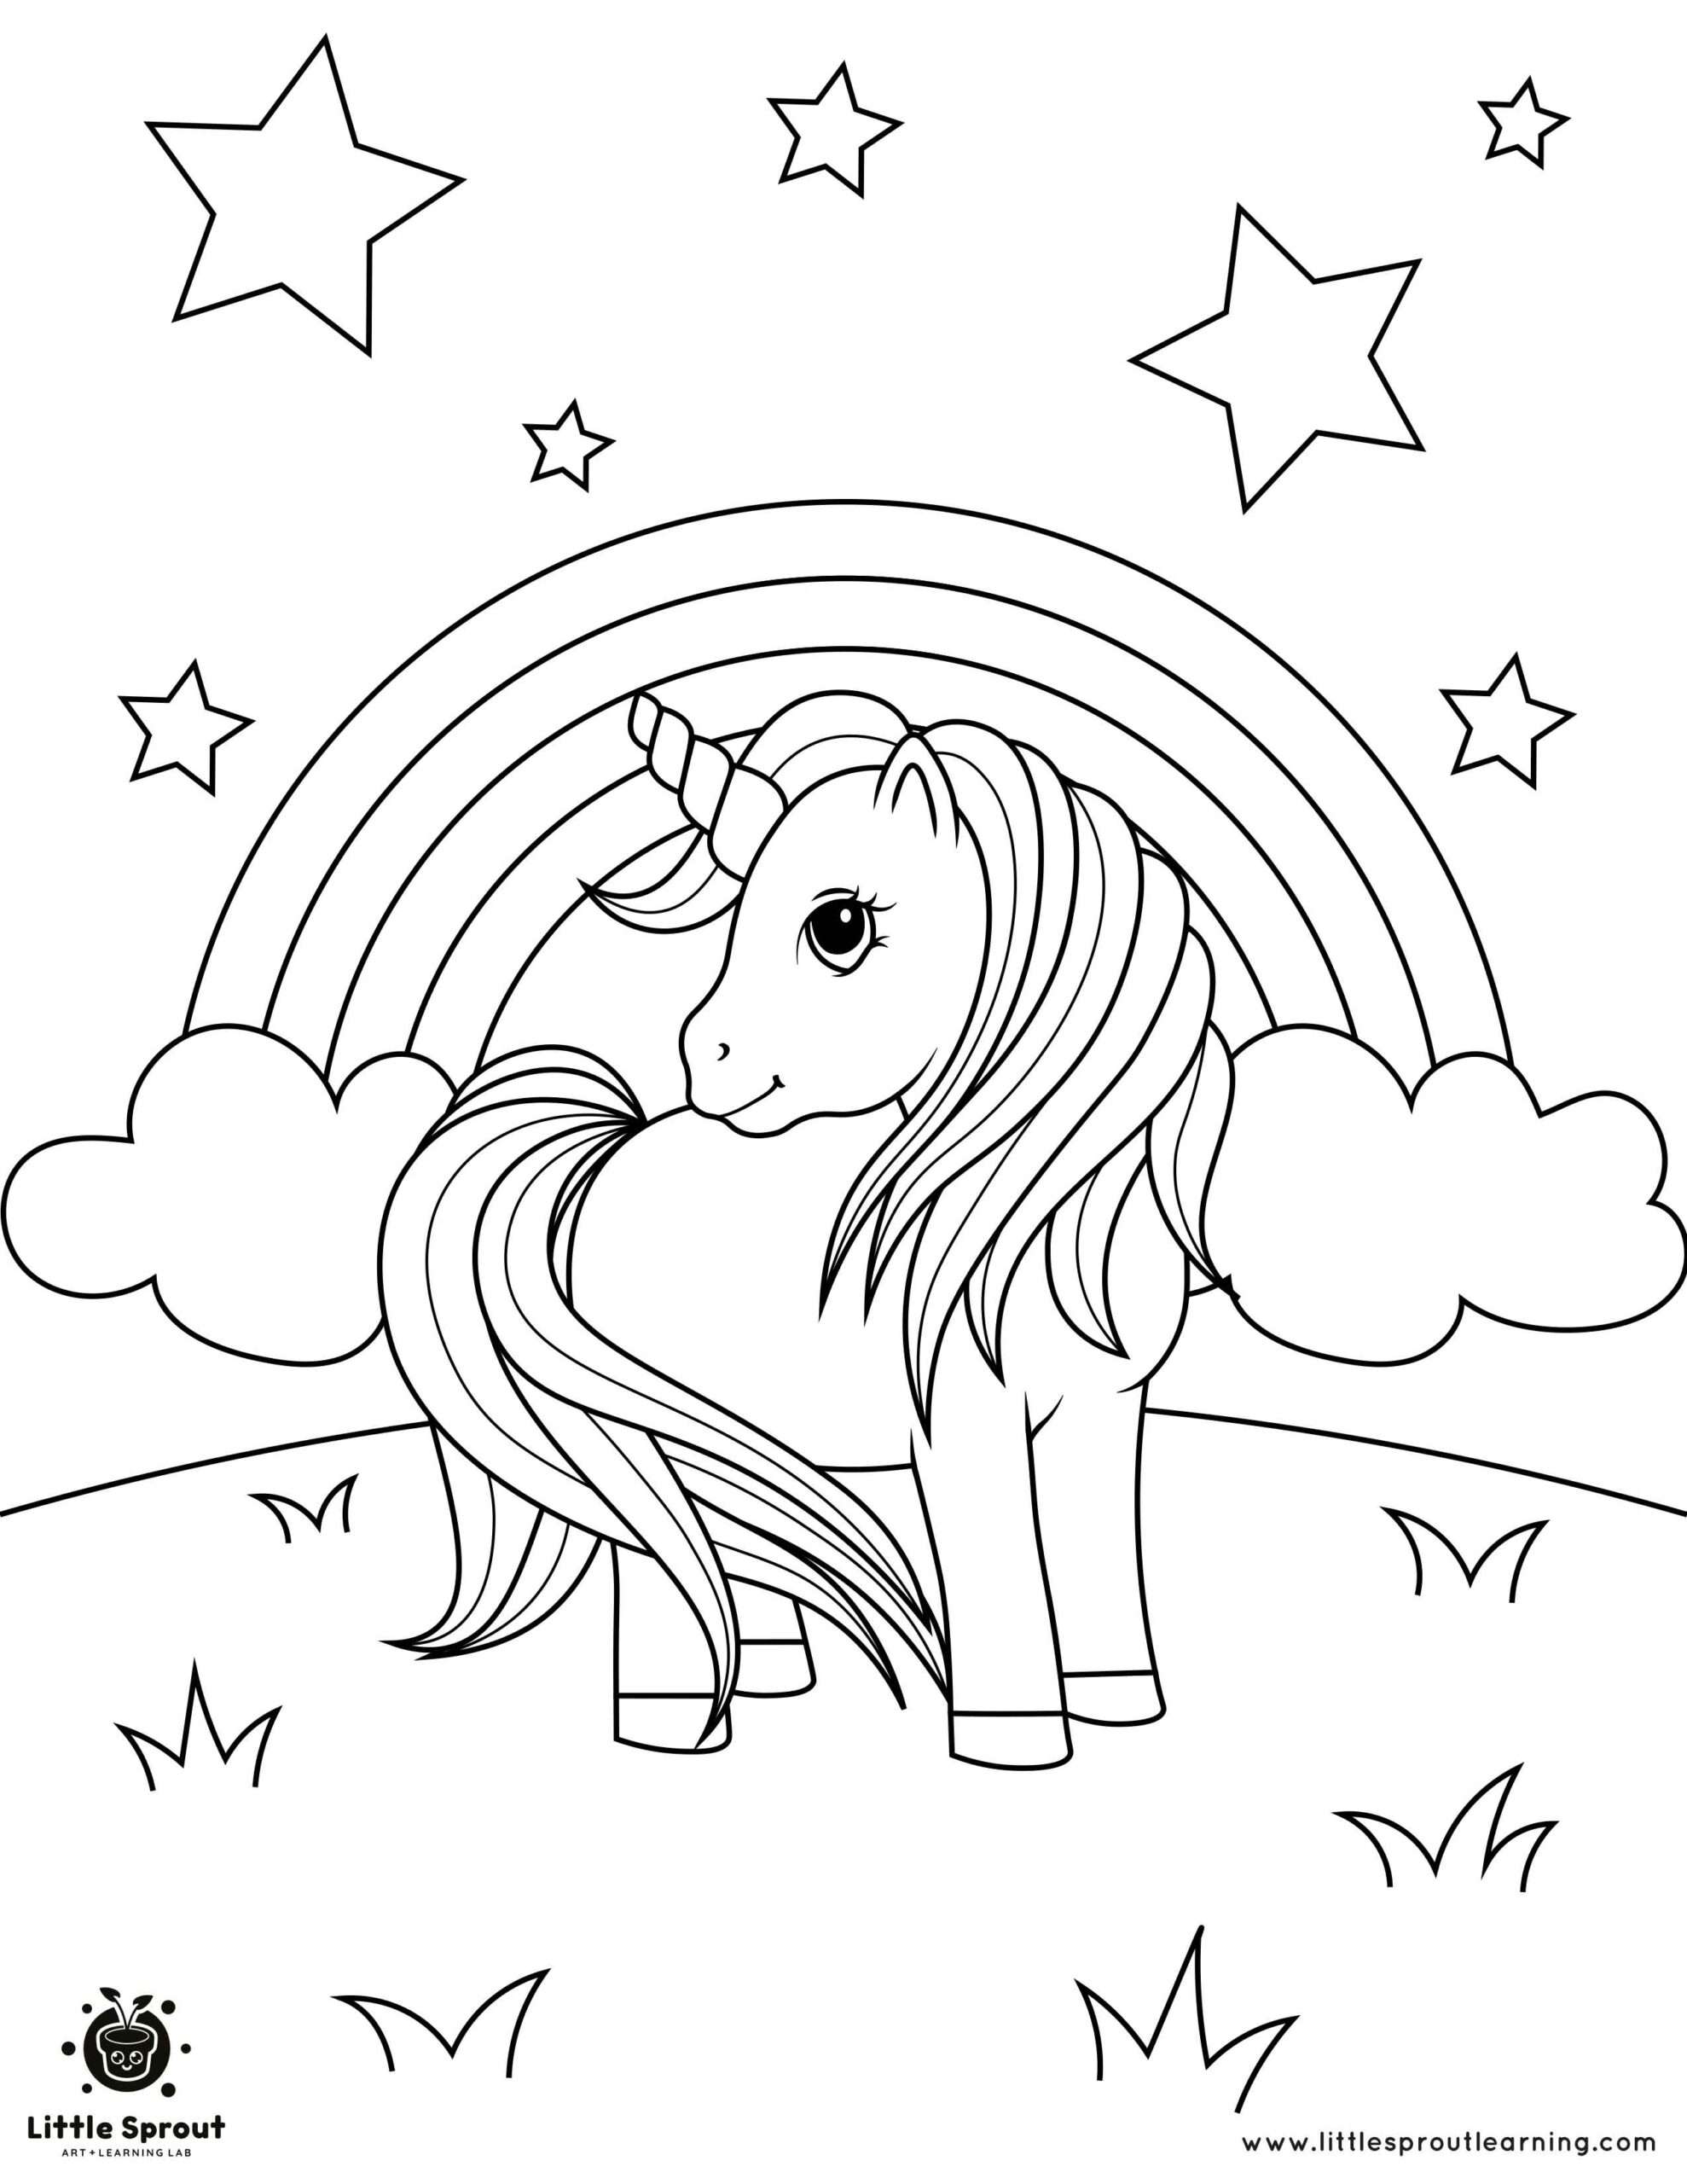 Coloring Page Unicorn 1 Little Sprout Learning scaled